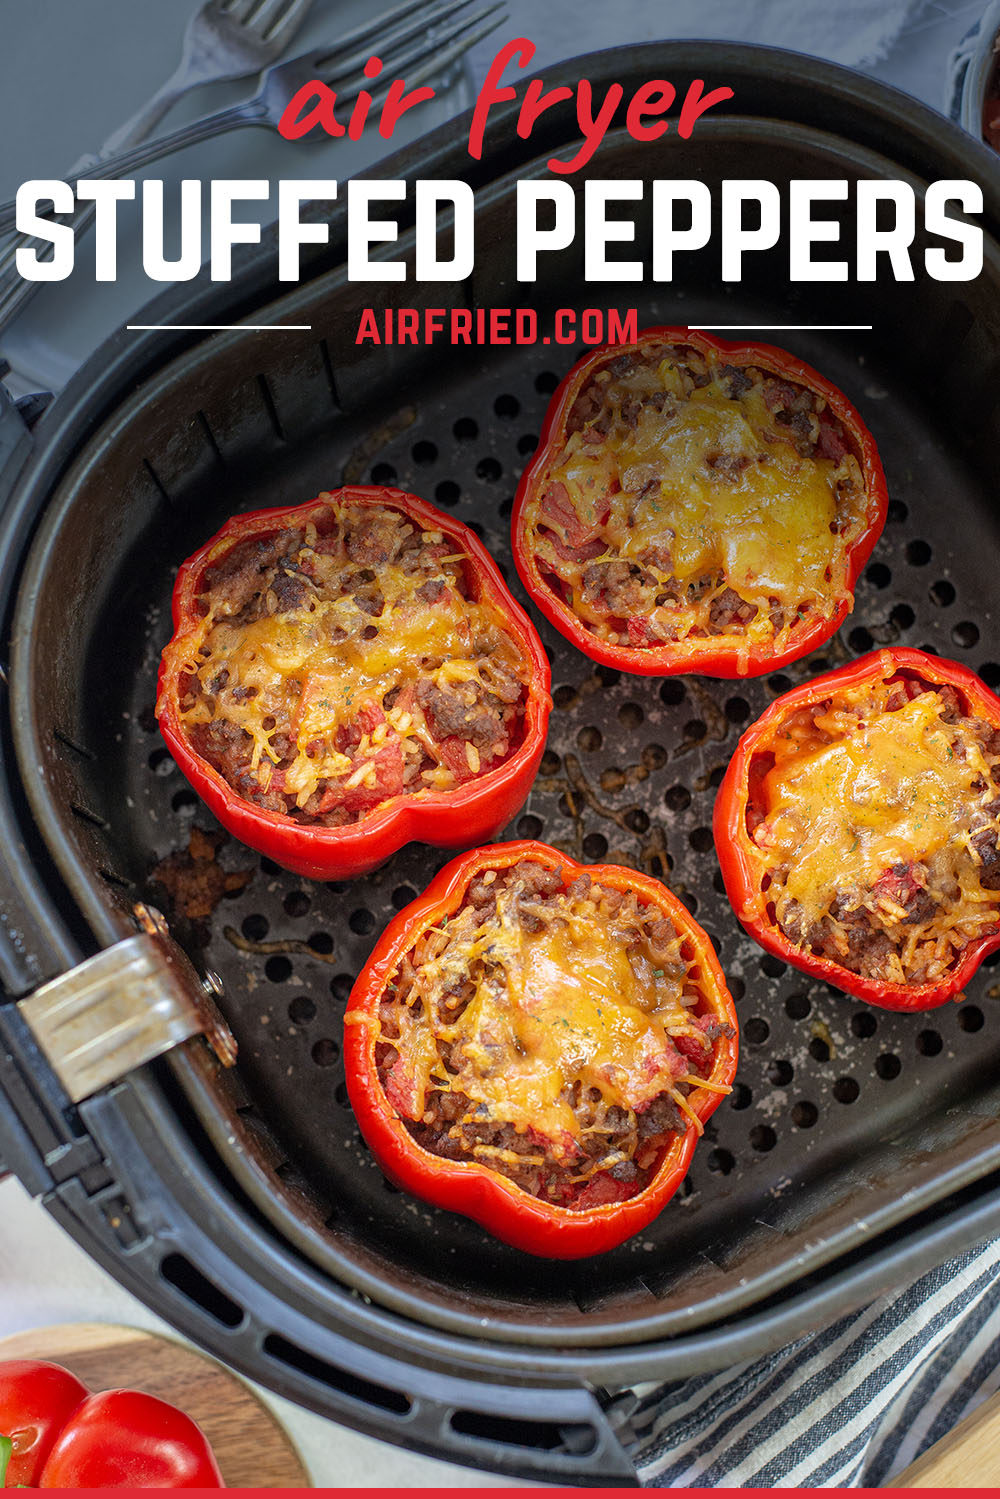 These stuffed peppers cook in about 15 minutes in the air fryer - so quick and simple!